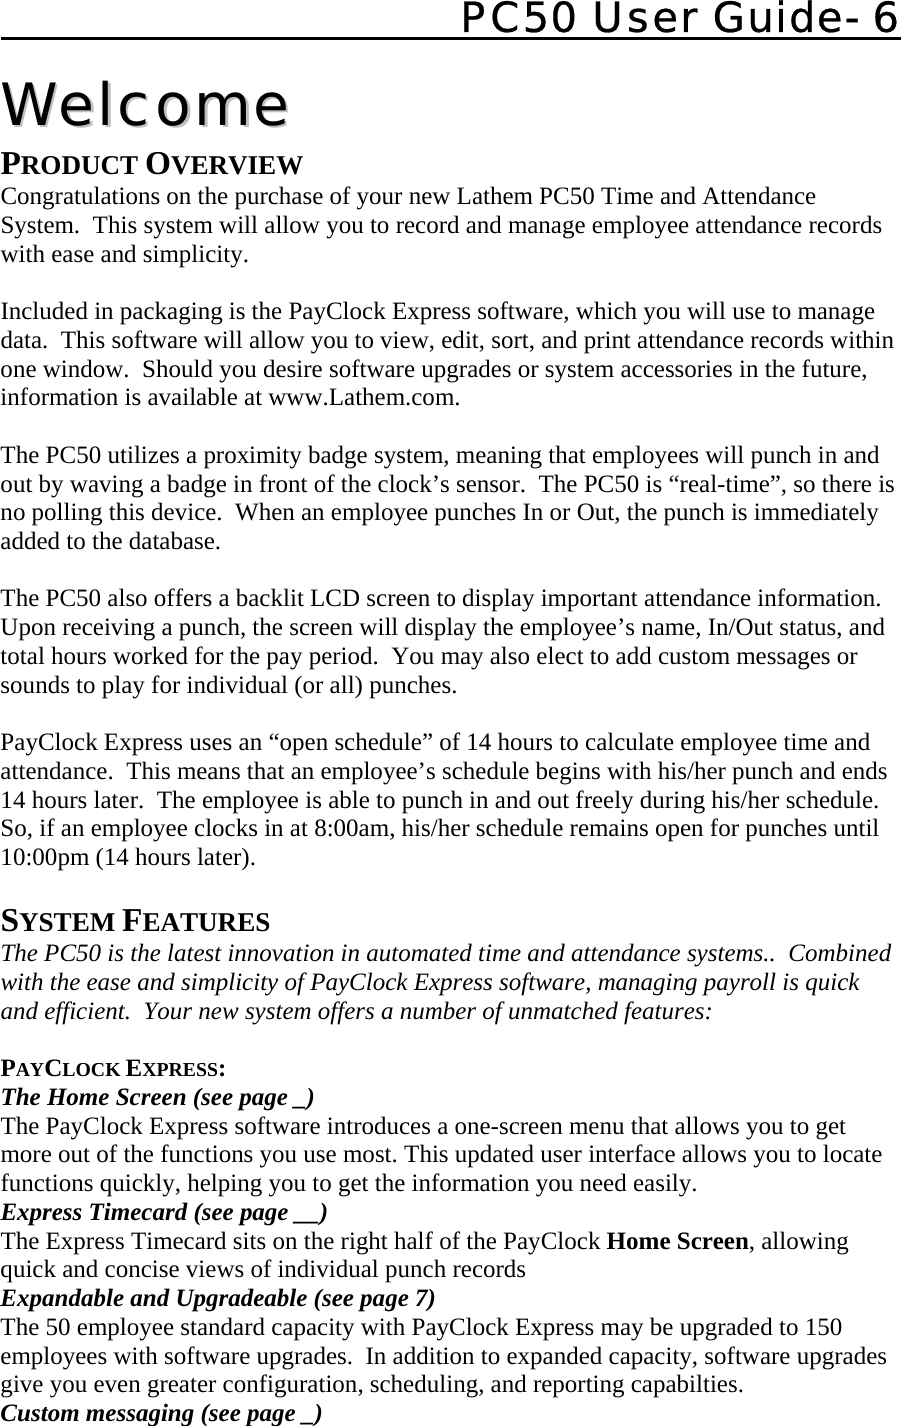    PC50 User Guide- 6   WWeellccoommee  PRODUCT OVERVIEW Congratulations on the purchase of your new Lathem PC50 Time and Attendance System.  This system will allow you to record and manage employee attendance records with ease and simplicity.    Included in packaging is the PayClock Express software, which you will use to manage data.  This software will allow you to view, edit, sort, and print attendance records within one window.  Should you desire software upgrades or system accessories in the future, information is available at www.Lathem.com.  The PC50 utilizes a proximity badge system, meaning that employees will punch in and out by waving a badge in front of the clock’s sensor.  The PC50 is “real-time”, so there is no polling this device.  When an employee punches In or Out, the punch is immediately added to the database.  The PC50 also offers a backlit LCD screen to display important attendance information.  Upon receiving a punch, the screen will display the employee’s name, In/Out status, and total hours worked for the pay period.  You may also elect to add custom messages or sounds to play for individual (or all) punches.  PayClock Express uses an “open schedule” of 14 hours to calculate employee time and attendance.  This means that an employee’s schedule begins with his/her punch and ends 14 hours later.  The employee is able to punch in and out freely during his/her schedule.  So, if an employee clocks in at 8:00am, his/her schedule remains open for punches until 10:00pm (14 hours later).  SYSTEM FEATURES The PC50 is the latest innovation in automated time and attendance systems..  Combined with the ease and simplicity of PayClock Express software, managing payroll is quick and efficient.  Your new system offers a number of unmatched features:  PAYCLOCK EXPRESS: The Home Screen (see page _) The PayClock Express software introduces a one-screen menu that allows you to get more out of the functions you use most. This updated user interface allows you to locate functions quickly, helping you to get the information you need easily. Express Timecard (see page __)   The Express Timecard sits on the right half of the PayClock Home Screen, allowing quick and concise views of individual punch records Expandable and Upgradeable (see page 7) The 50 employee standard capacity with PayClock Express may be upgraded to 150 employees with software upgrades.  In addition to expanded capacity, software upgrades give you even greater configuration, scheduling, and reporting capabilties. Custom messaging (see page _) 